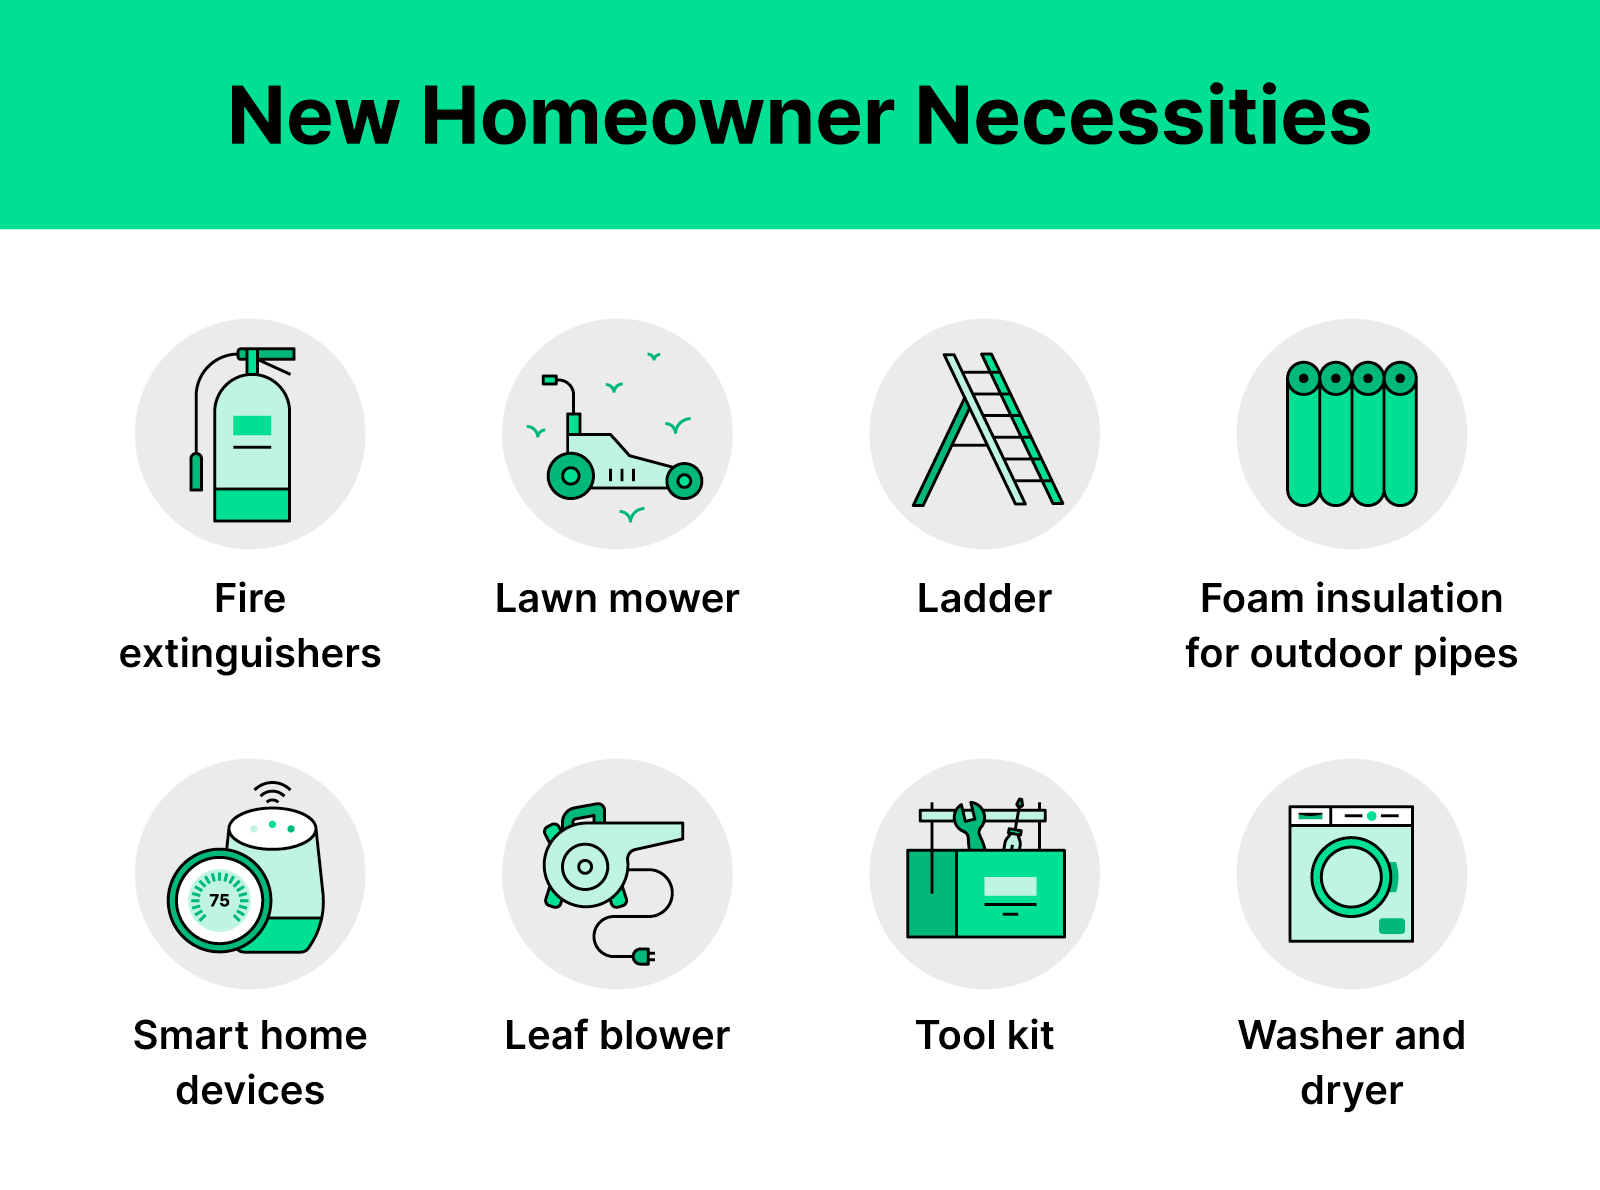 Green illustrations of each new homeowner need